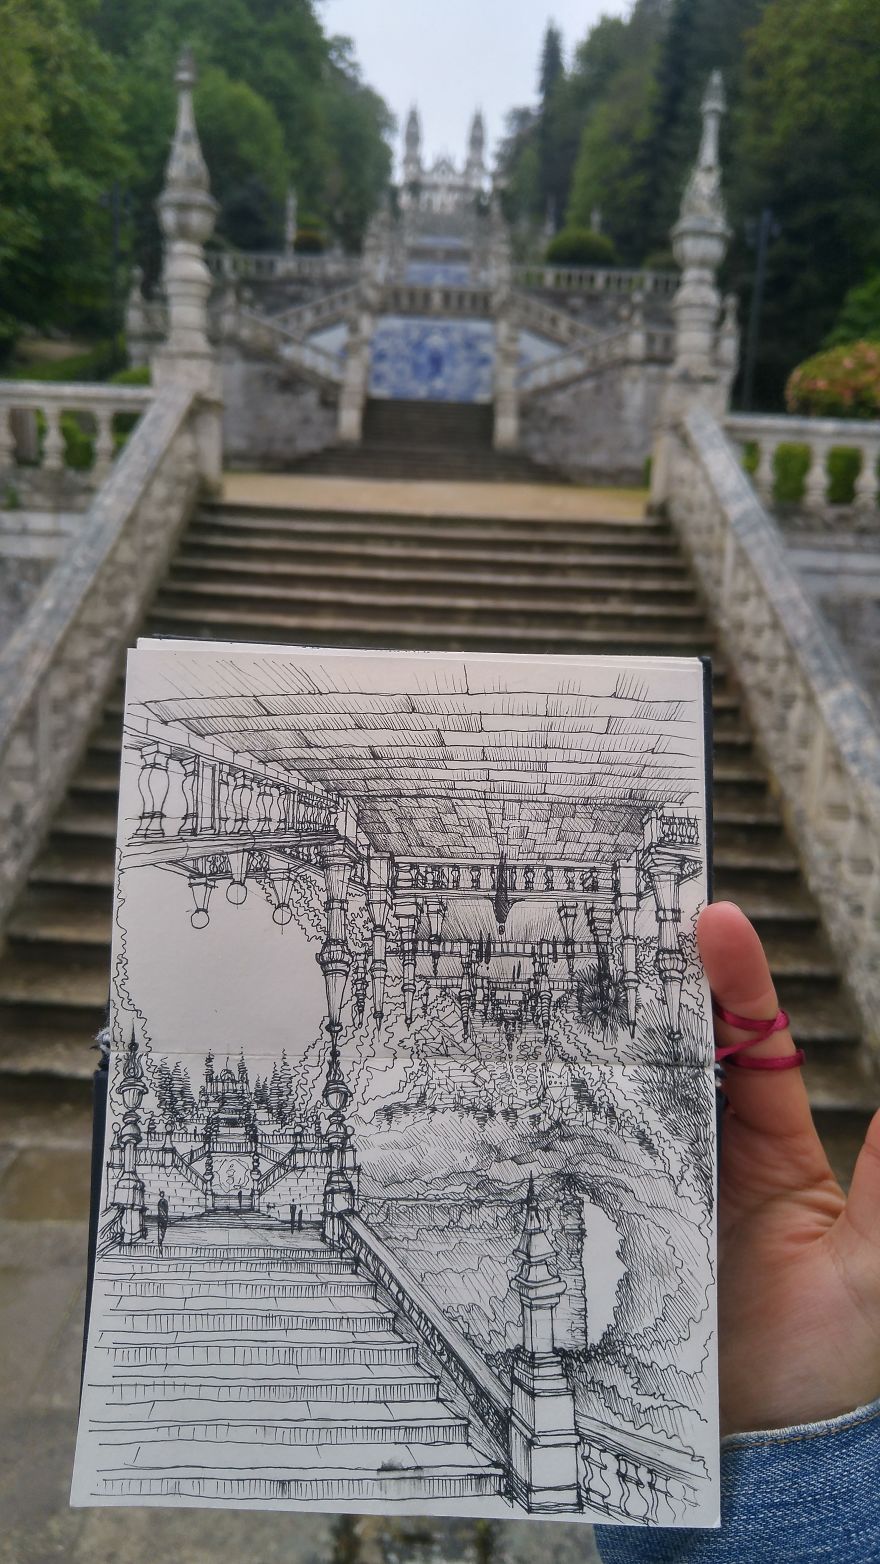 This "Stairway To Heaven" View Looked Similarly Amazing From Top And Bottom, So I Had To Draw Both